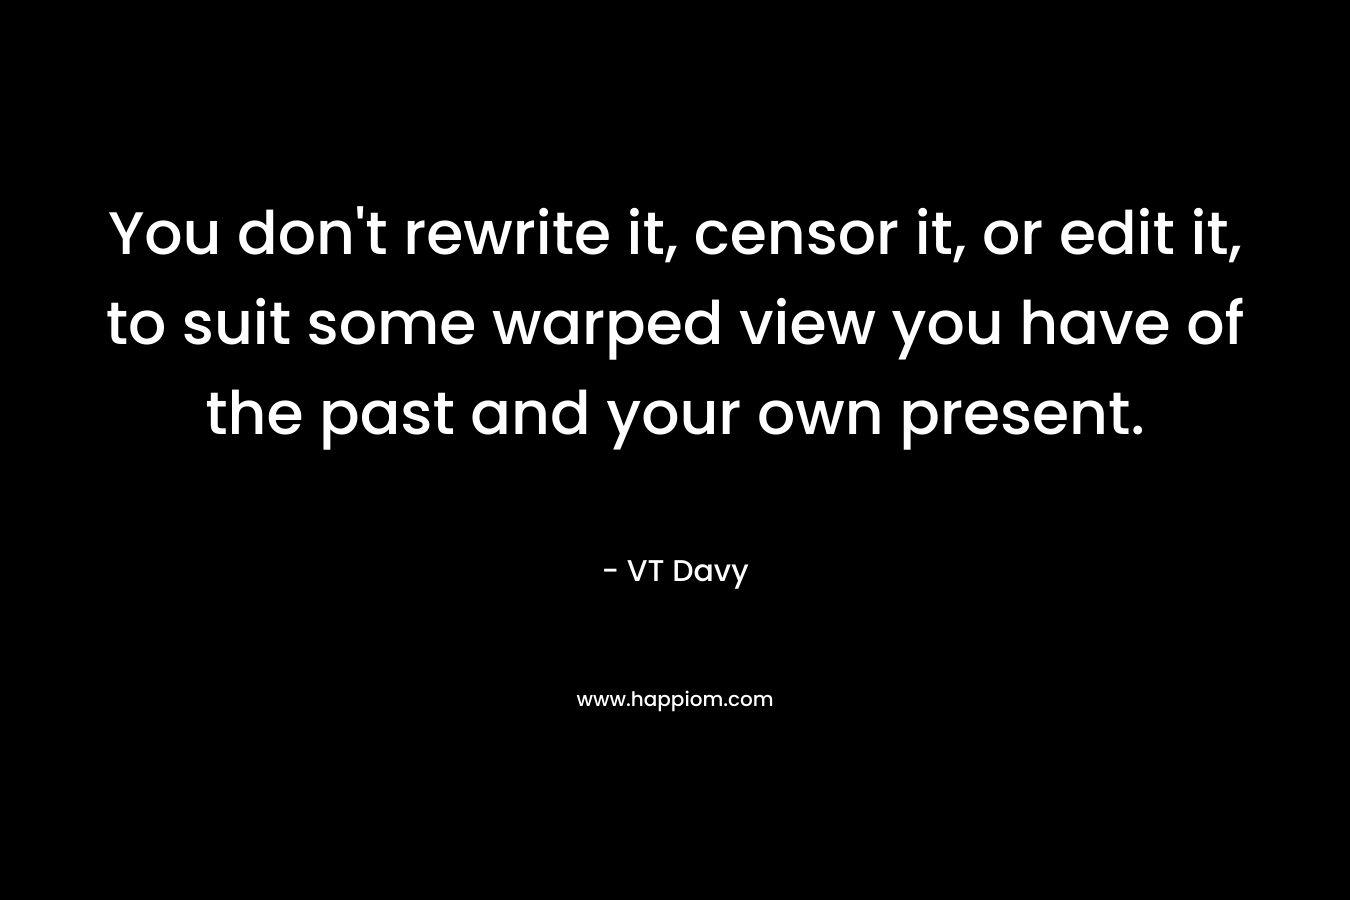 You don’t rewrite it, censor it, or edit it, to suit some warped view you have of the past and your own present. – VT Davy